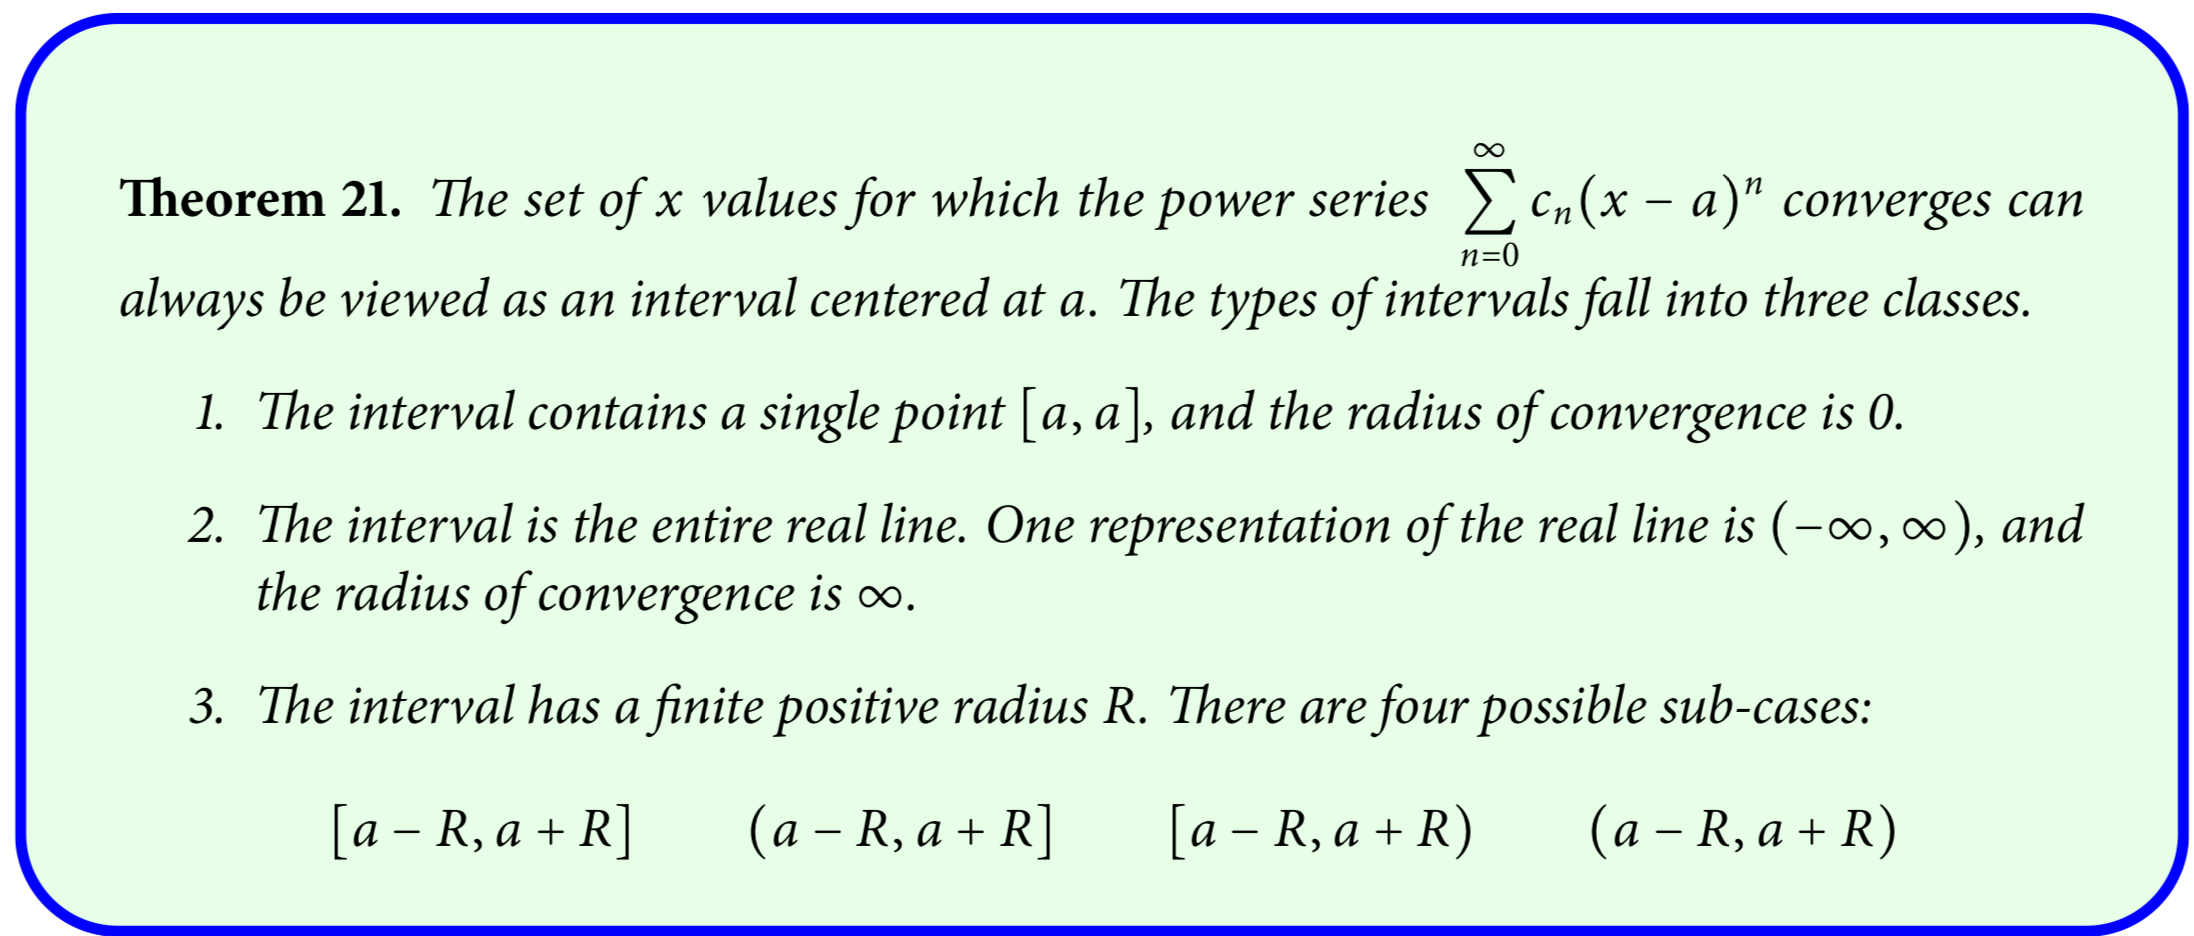 Theorem 21. The set of x values for which the power series Cn(x – a)" converges can
n=0
always be viewed as an interval centered at a. The types of intervals fall into three classes.
1. The interval contains a single point [a, a], and the radius of convergence is 0.
2. The interval is the entire real line. One representation of the real line is (-∞, ), and
the radius of convergence is .
3. The interval has a finite positive radius R. There are four possible sub-cases:
[a – R, a + R]
(a – R, a + R]
[a – R, a + R)
(a – R, a + R)
